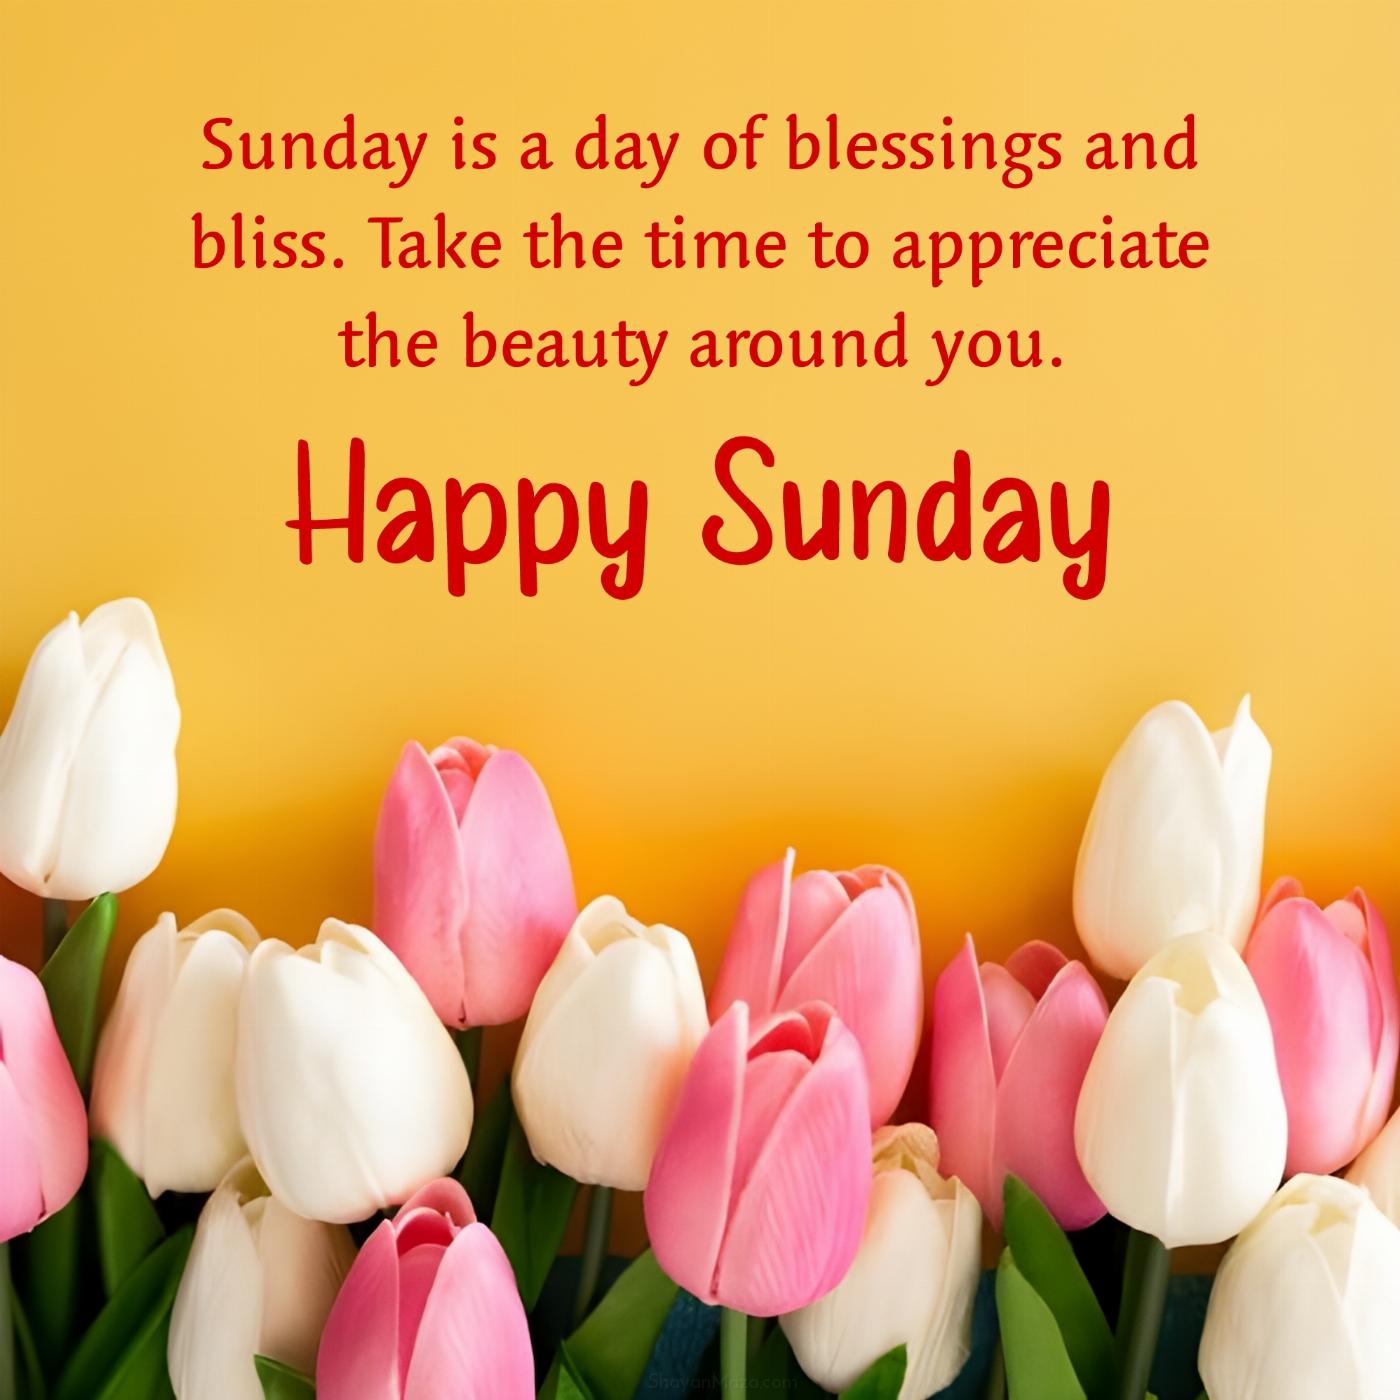 Sunday is a day of blessings and bliss